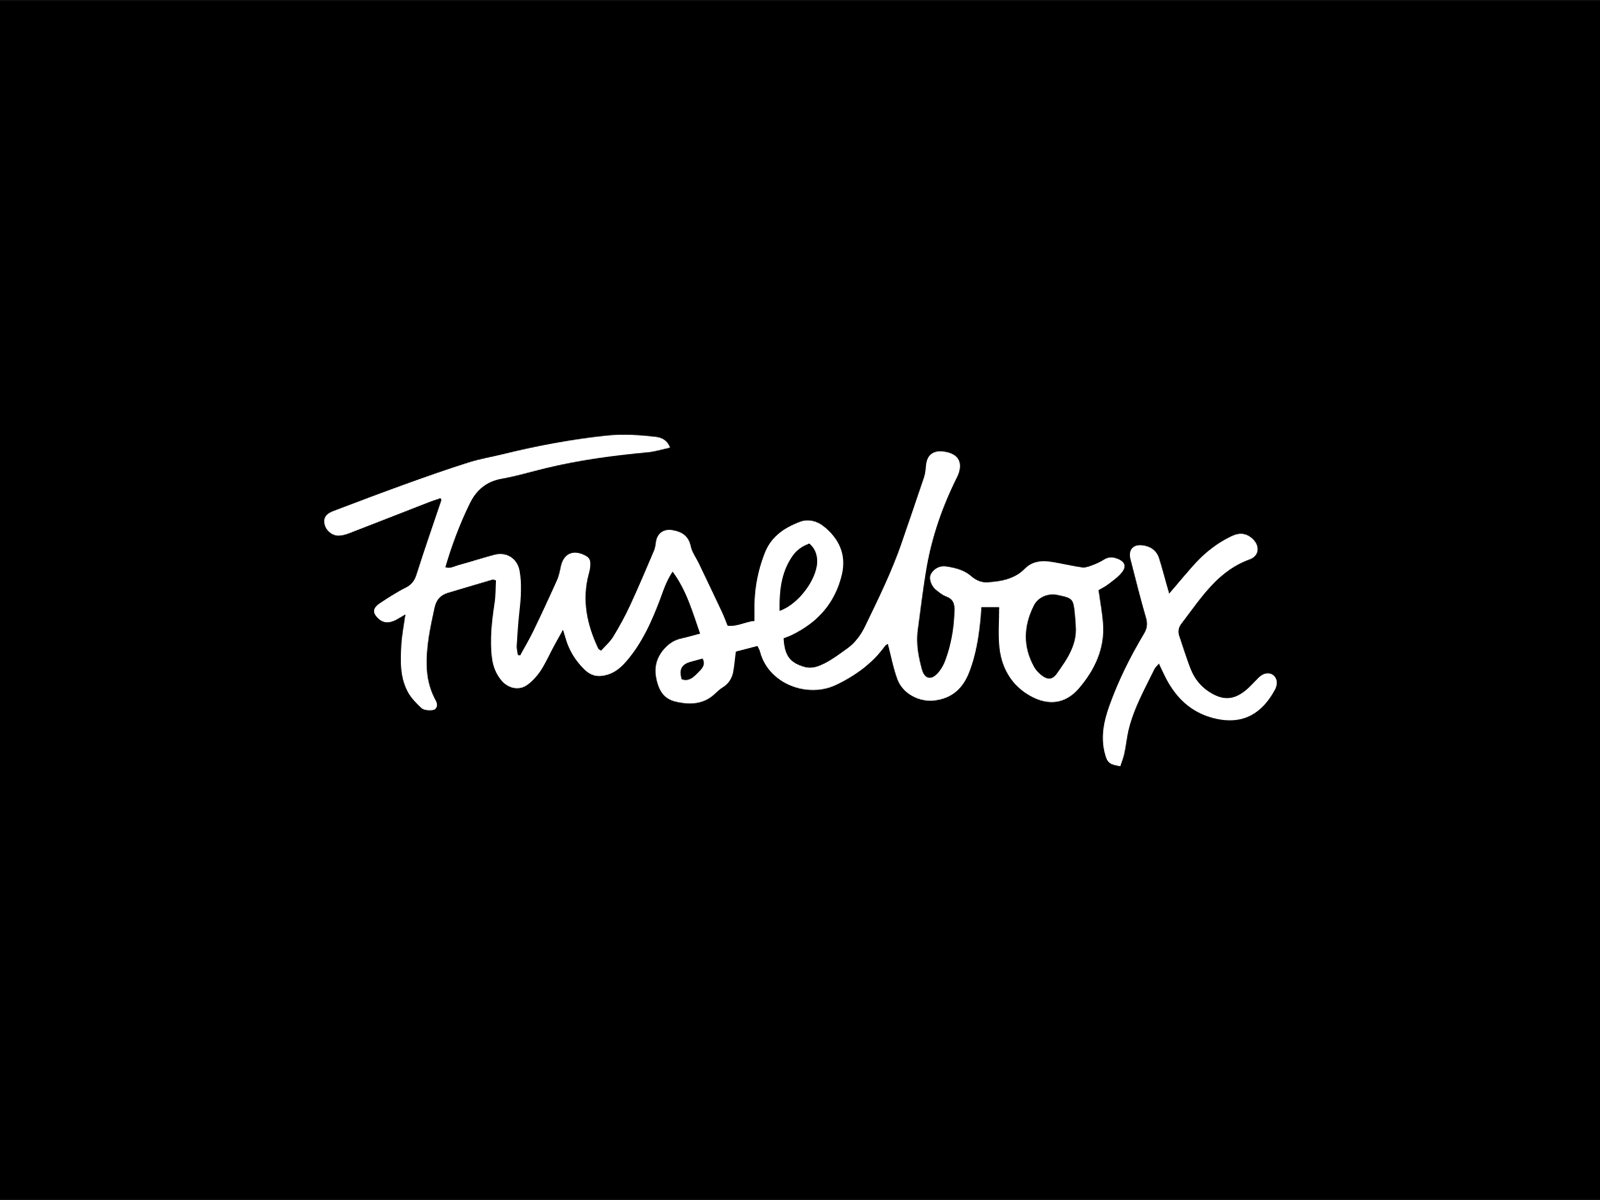 Fusebox initial sketches bespoke branding calligraphy custom type hand drawn hand lettering lettering logo processing script signature sketch typography